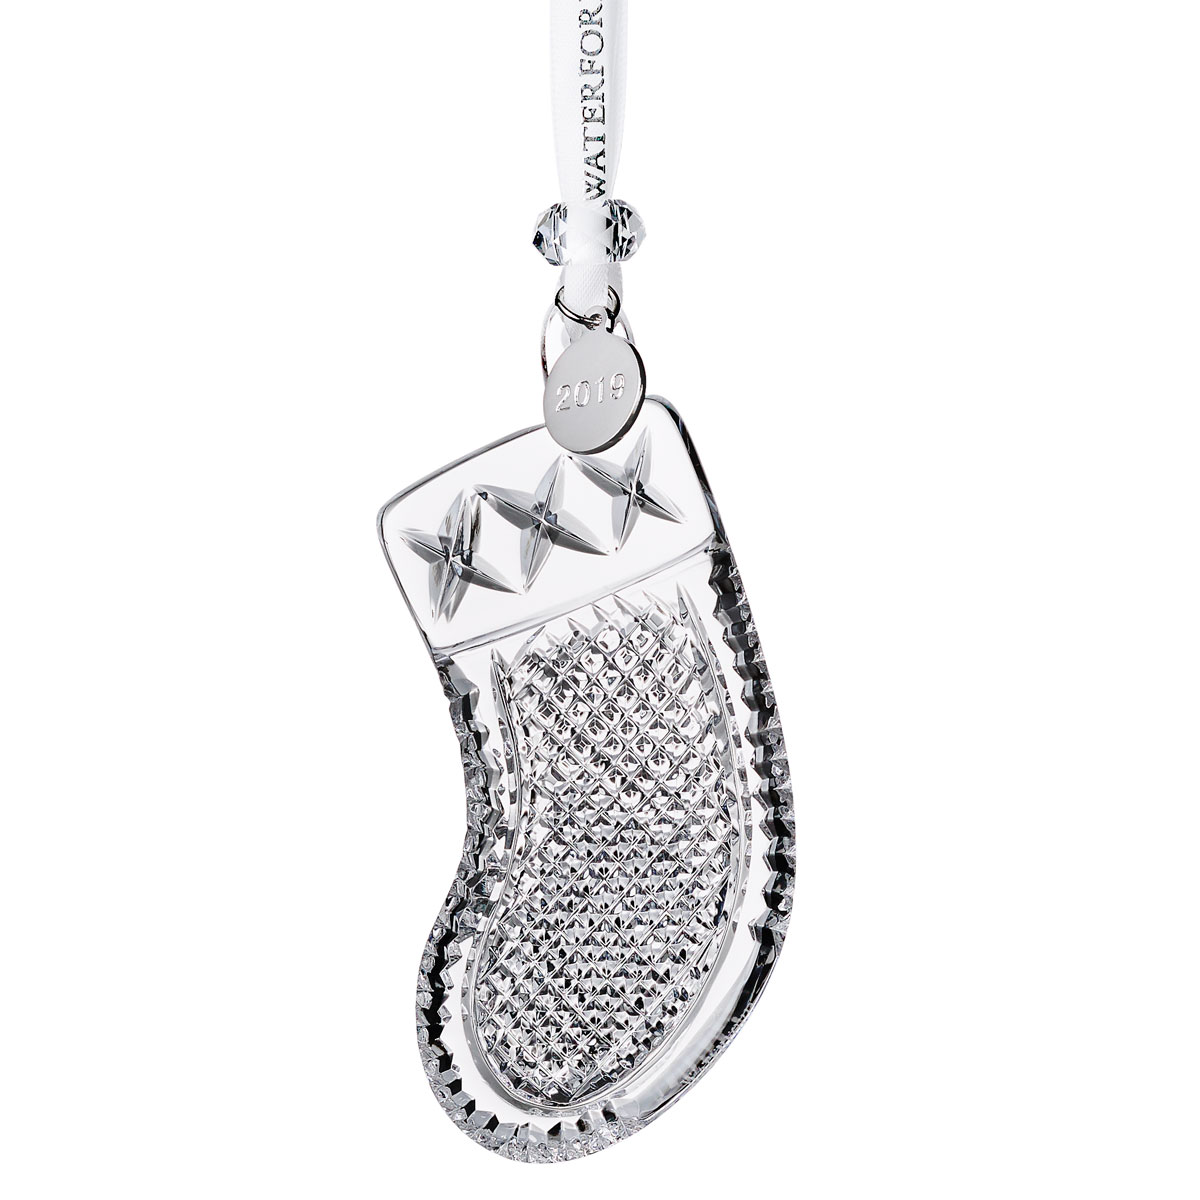 Waterford Crystal 2019 Stocking Christmas Ornament